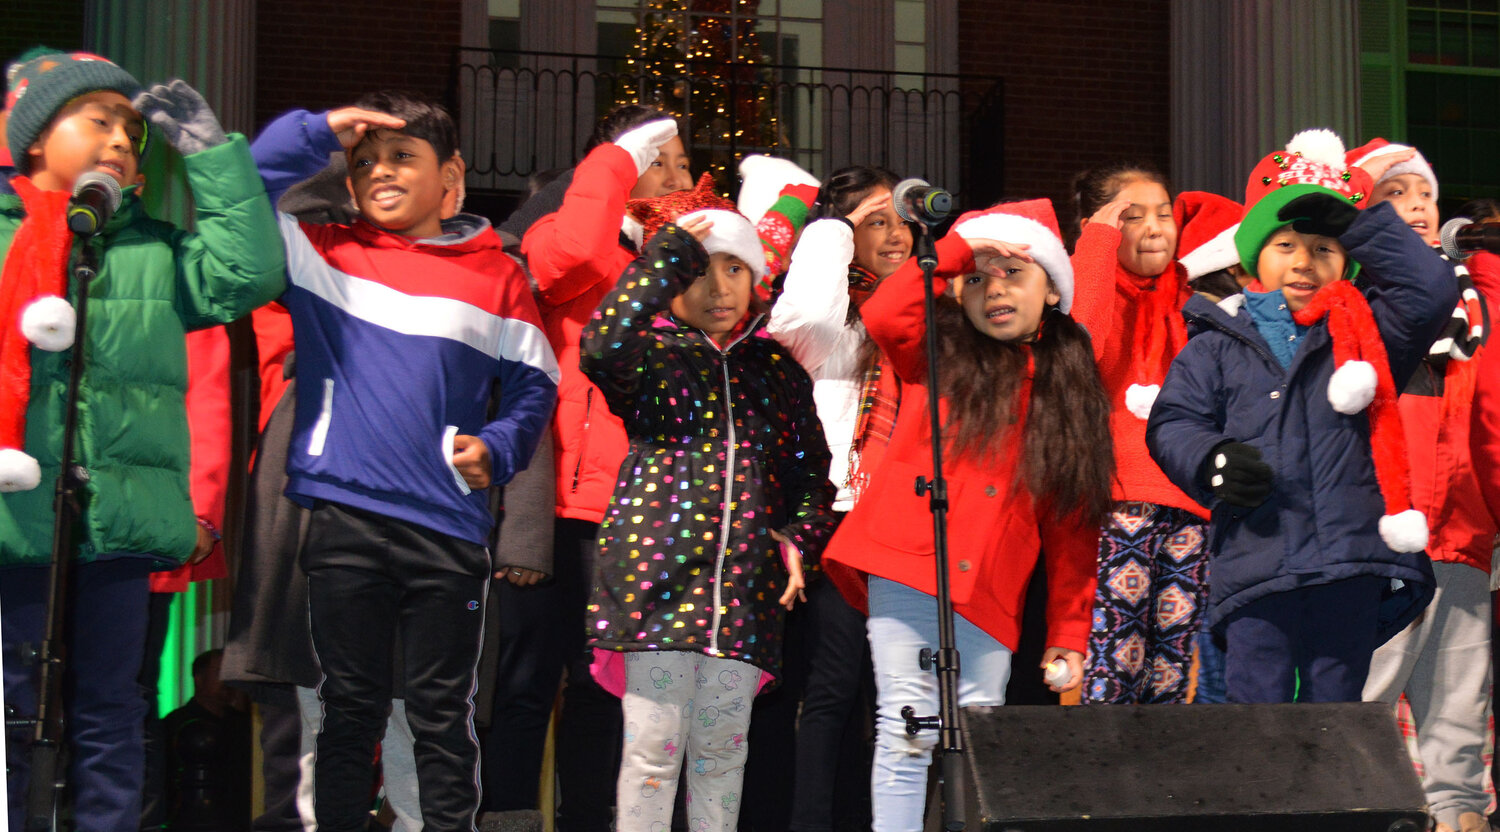 A popular Caroling on The Circle staple, the St. Michael the Archangel Parish children's choir performs at Thursday's event in Georgetown.